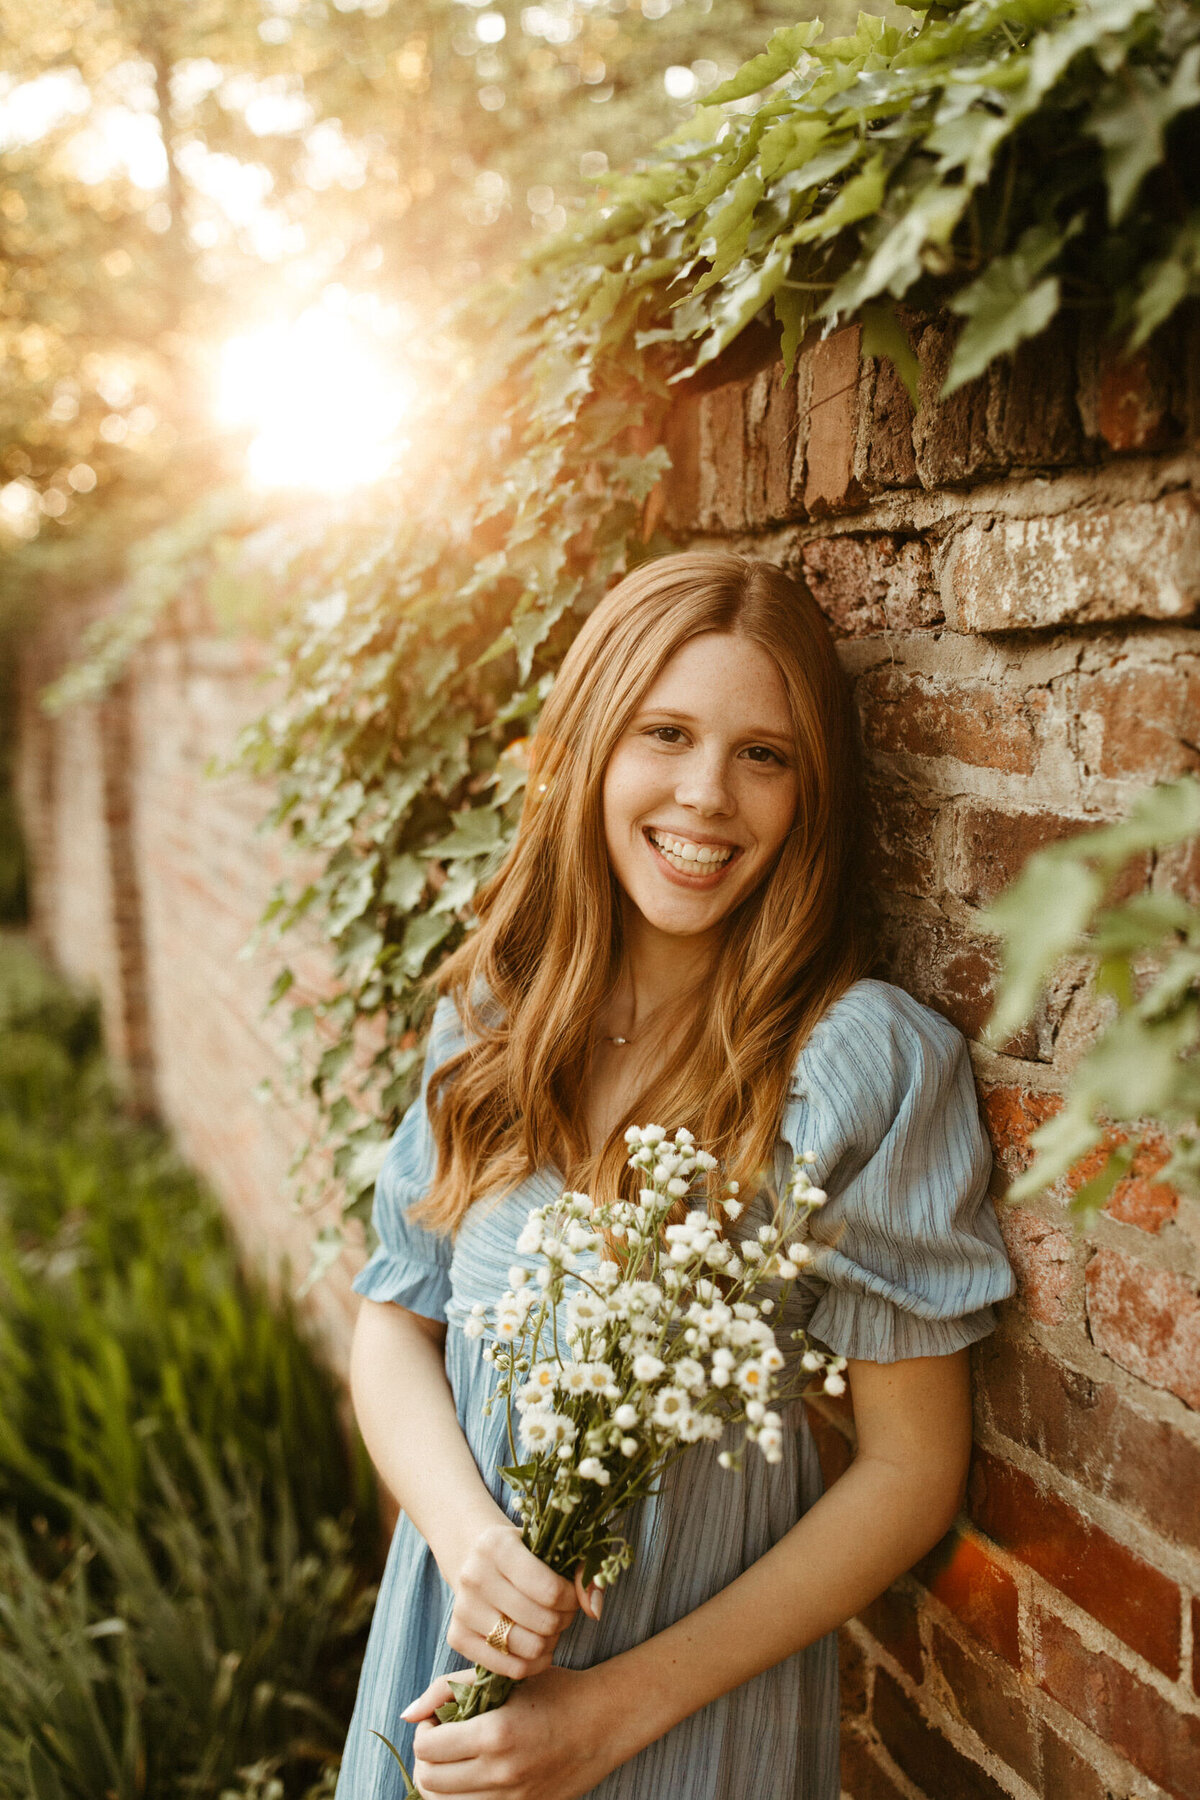 Girl senior holding a bundle of wildflowers and leaning against a brick wall with ivy growing along it